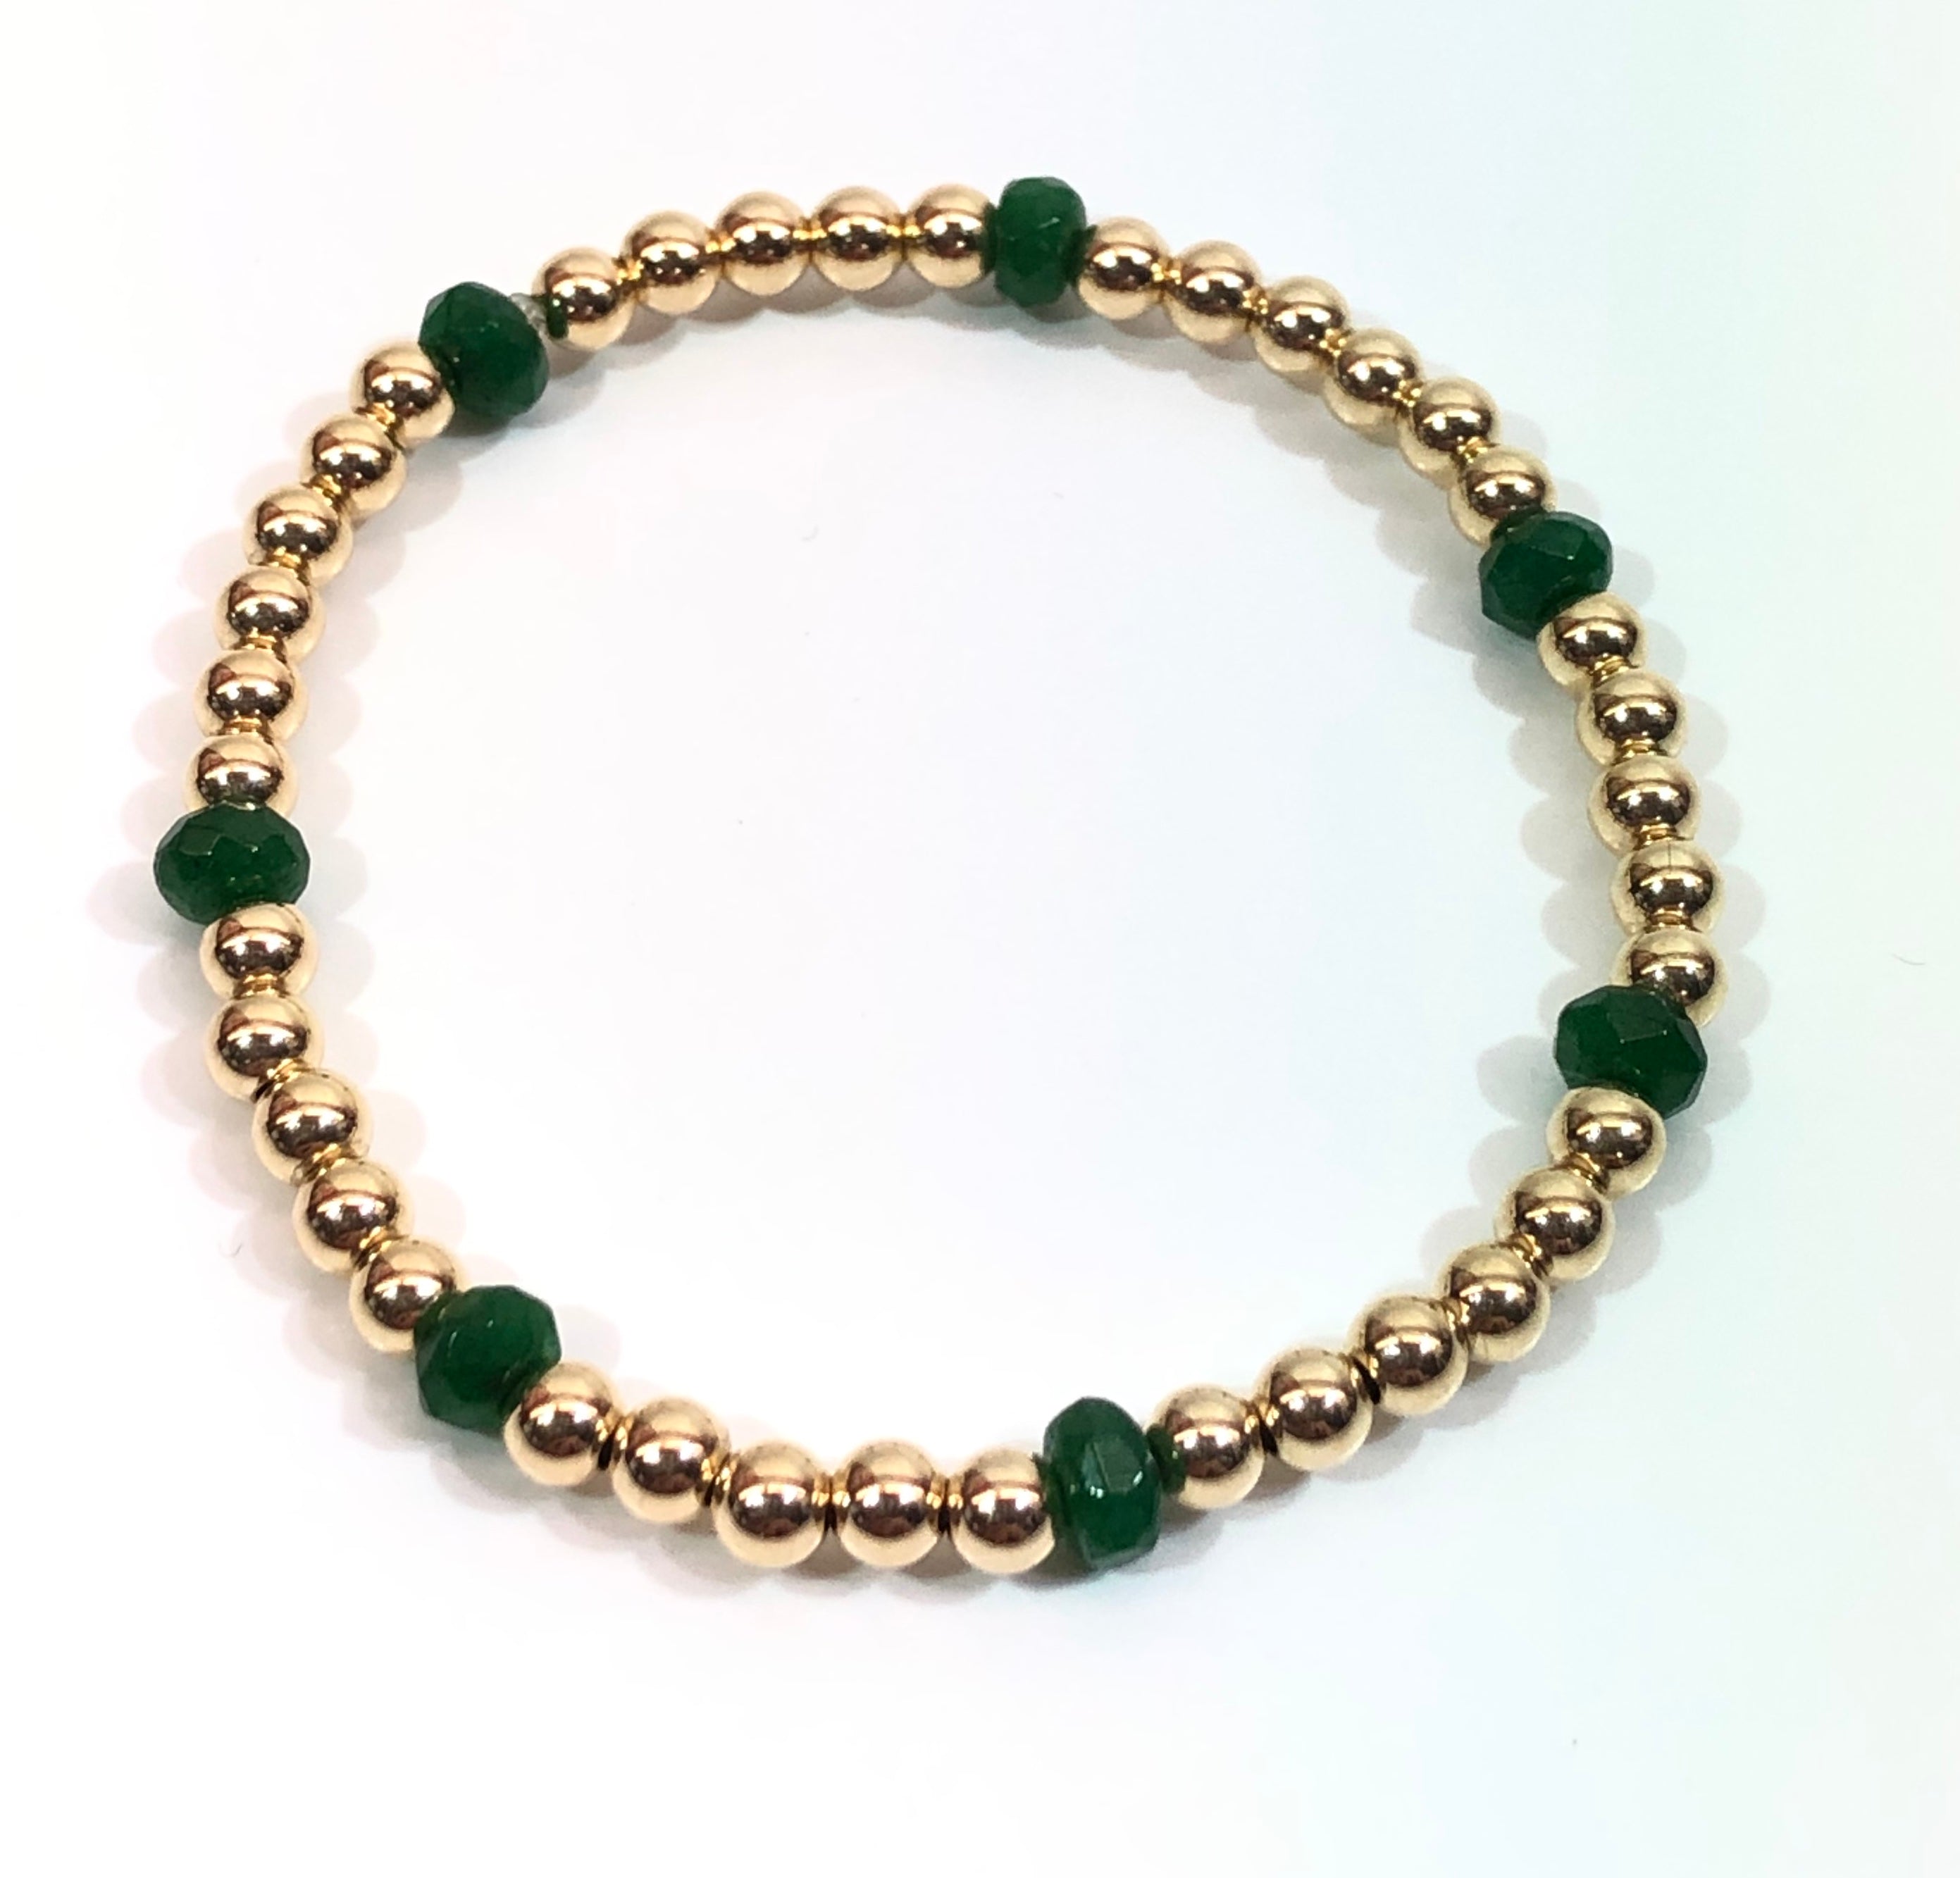 4mm 14kt Gold Filled Bead Bracelet with 7 4mm Emerald Beads